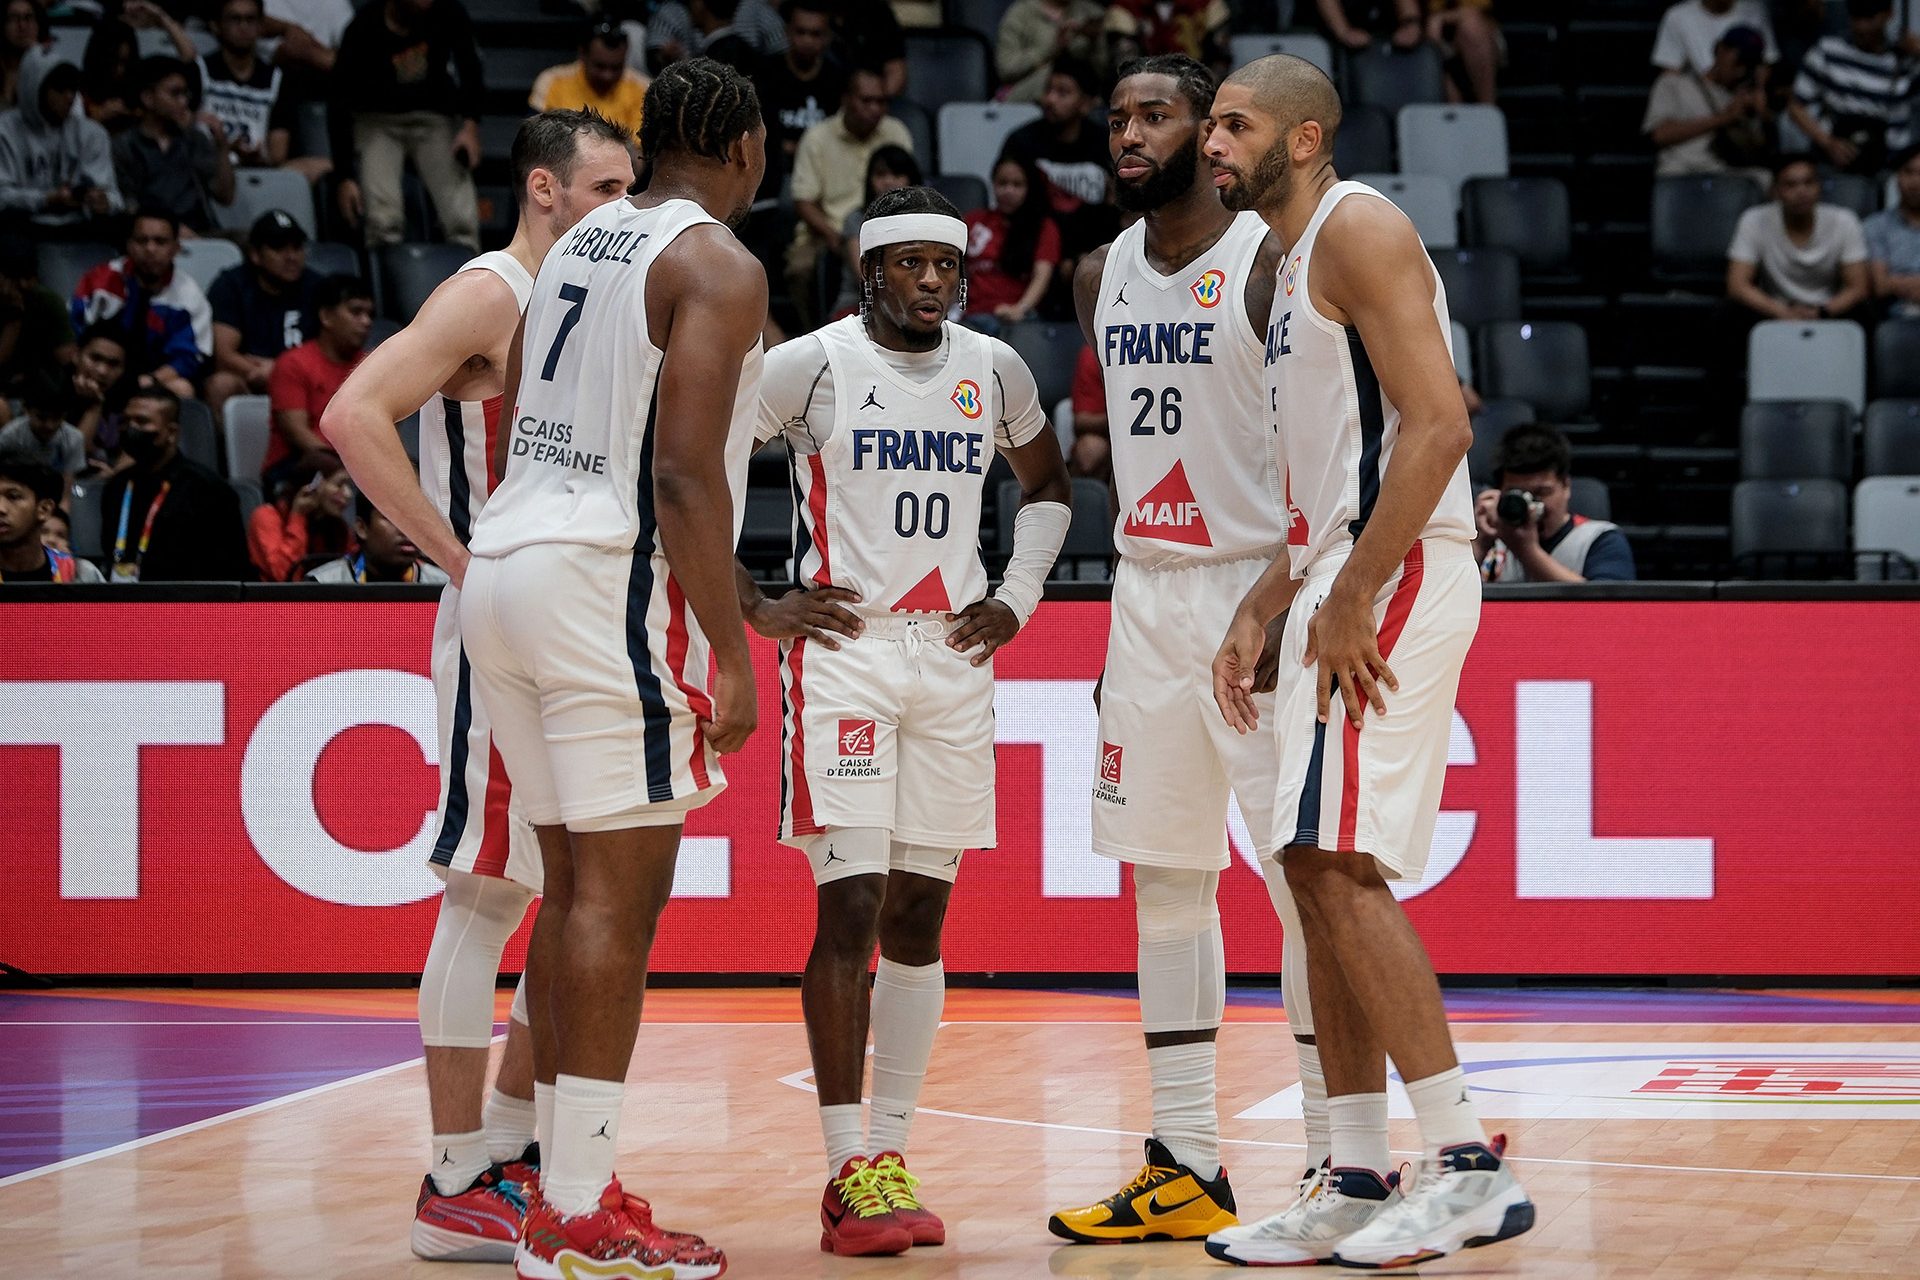 Basketball: The French catastrophe